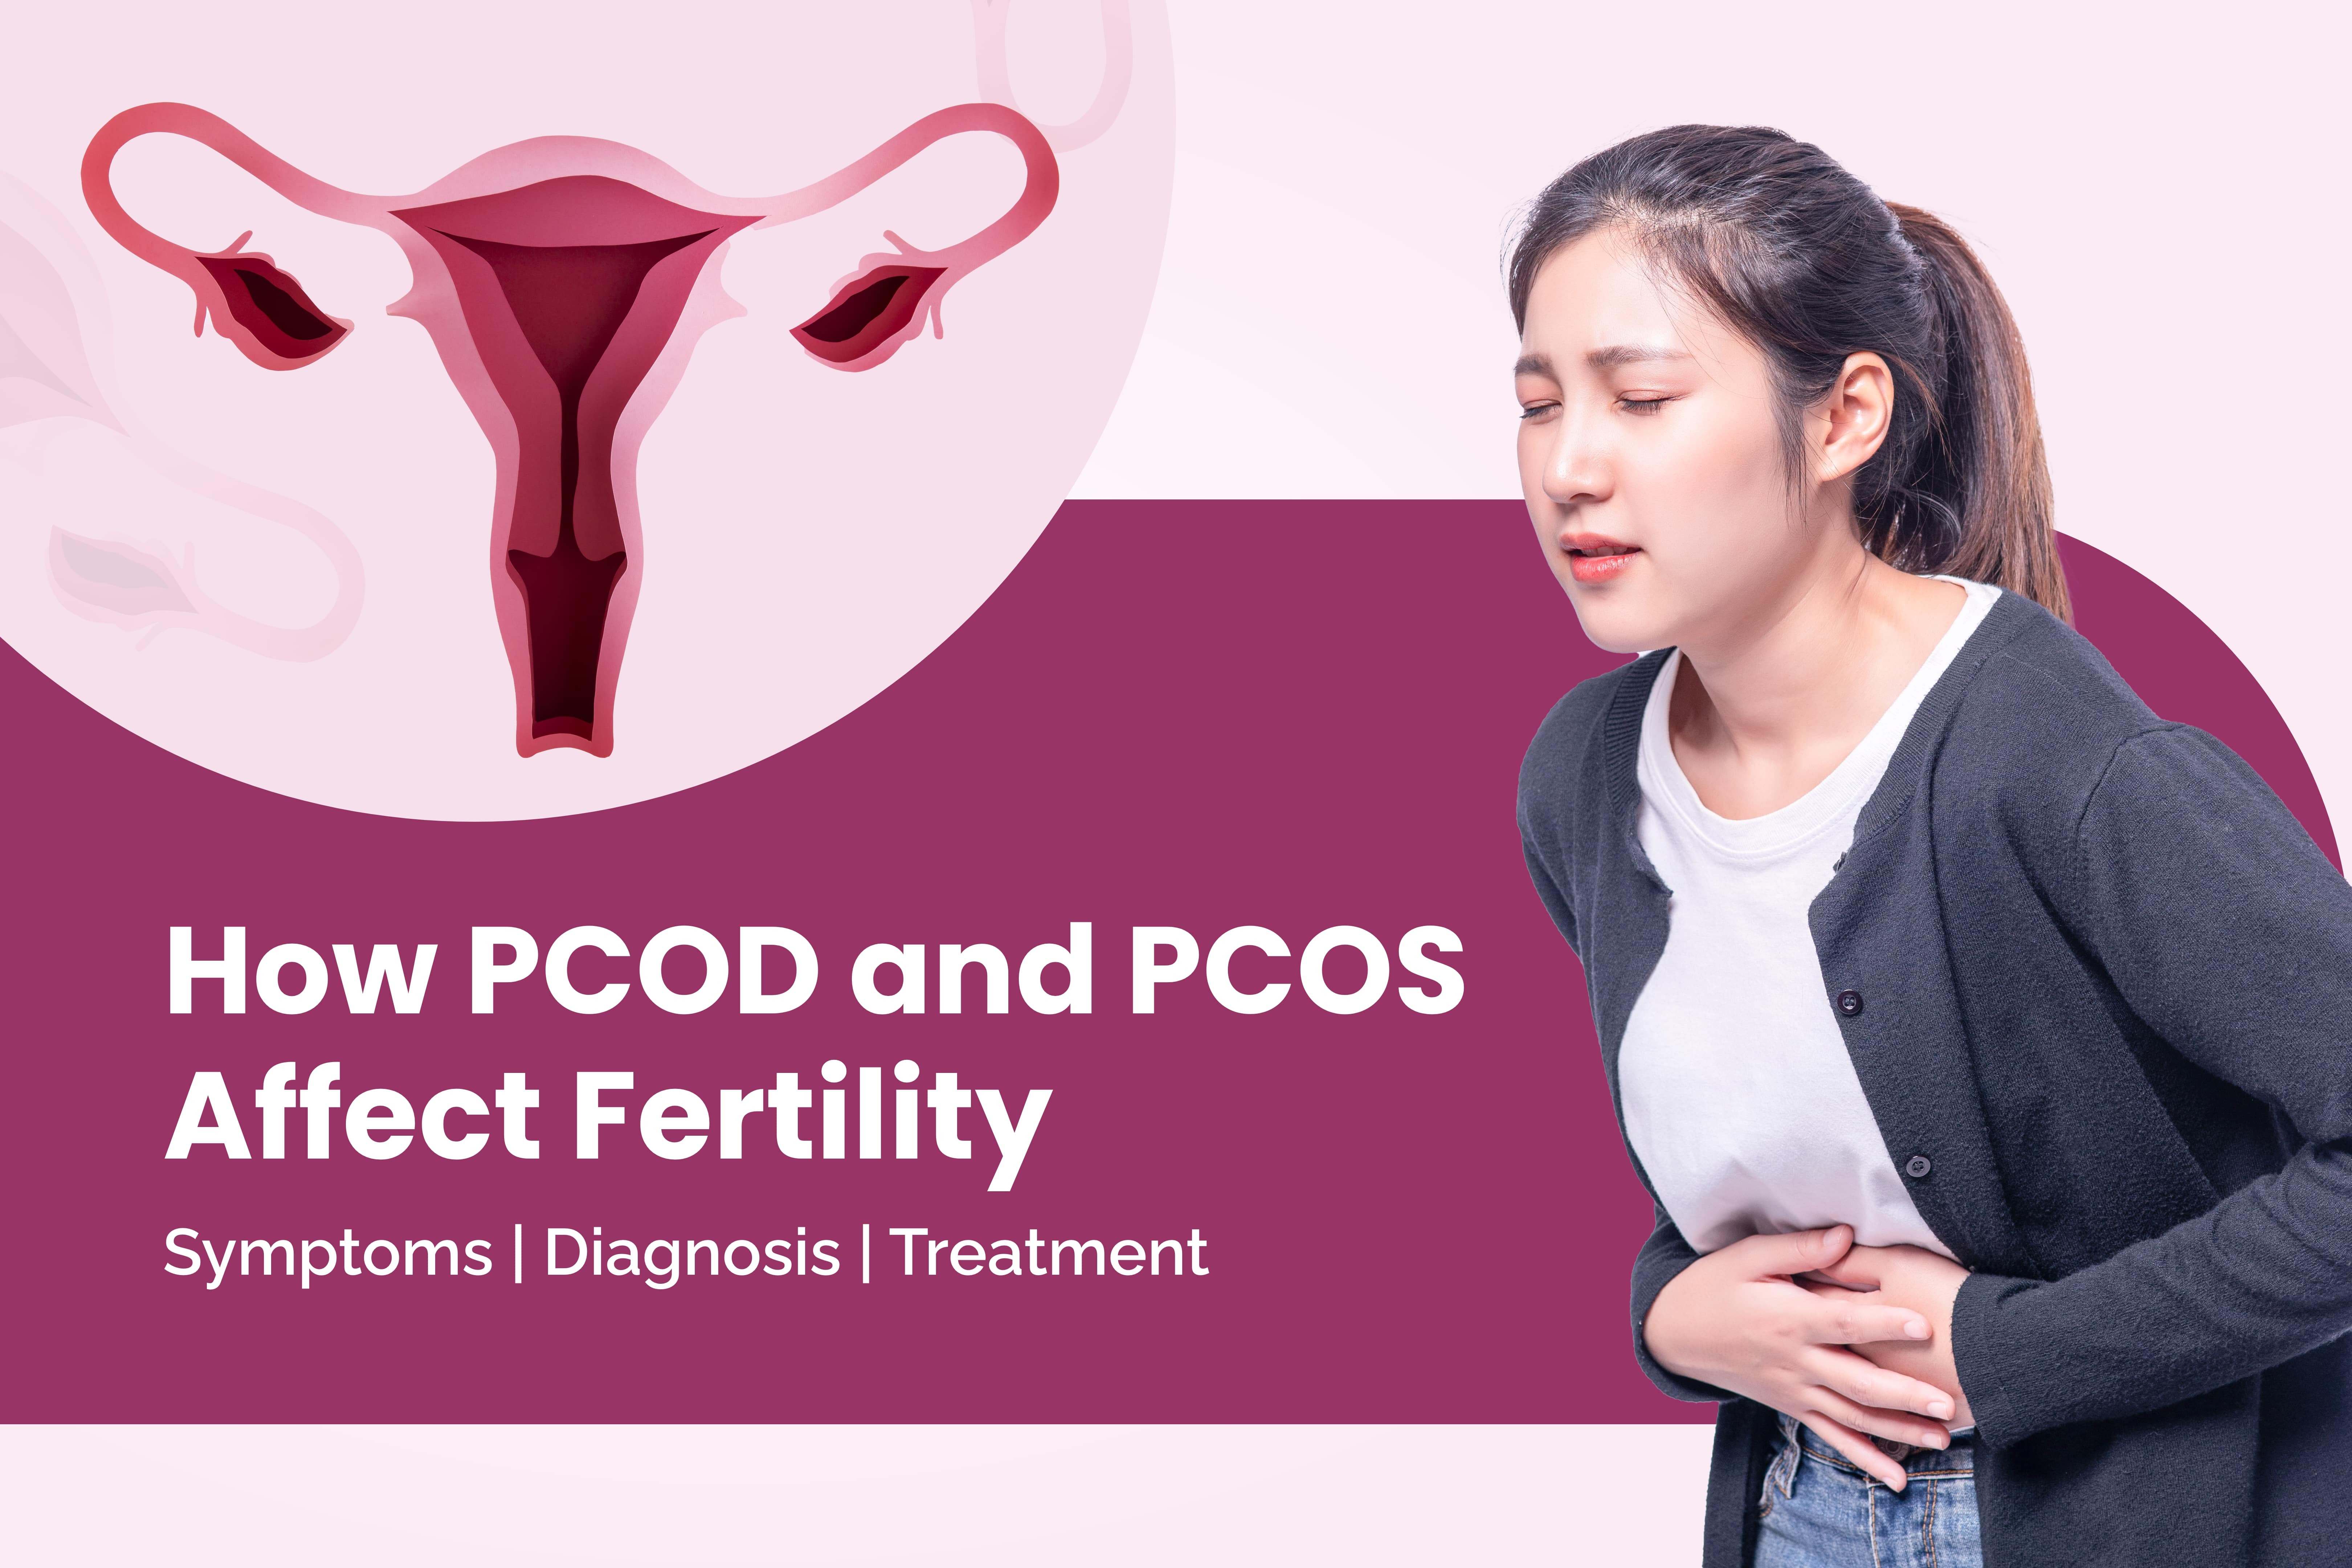 How PCOD and PCOS Affect Fertility